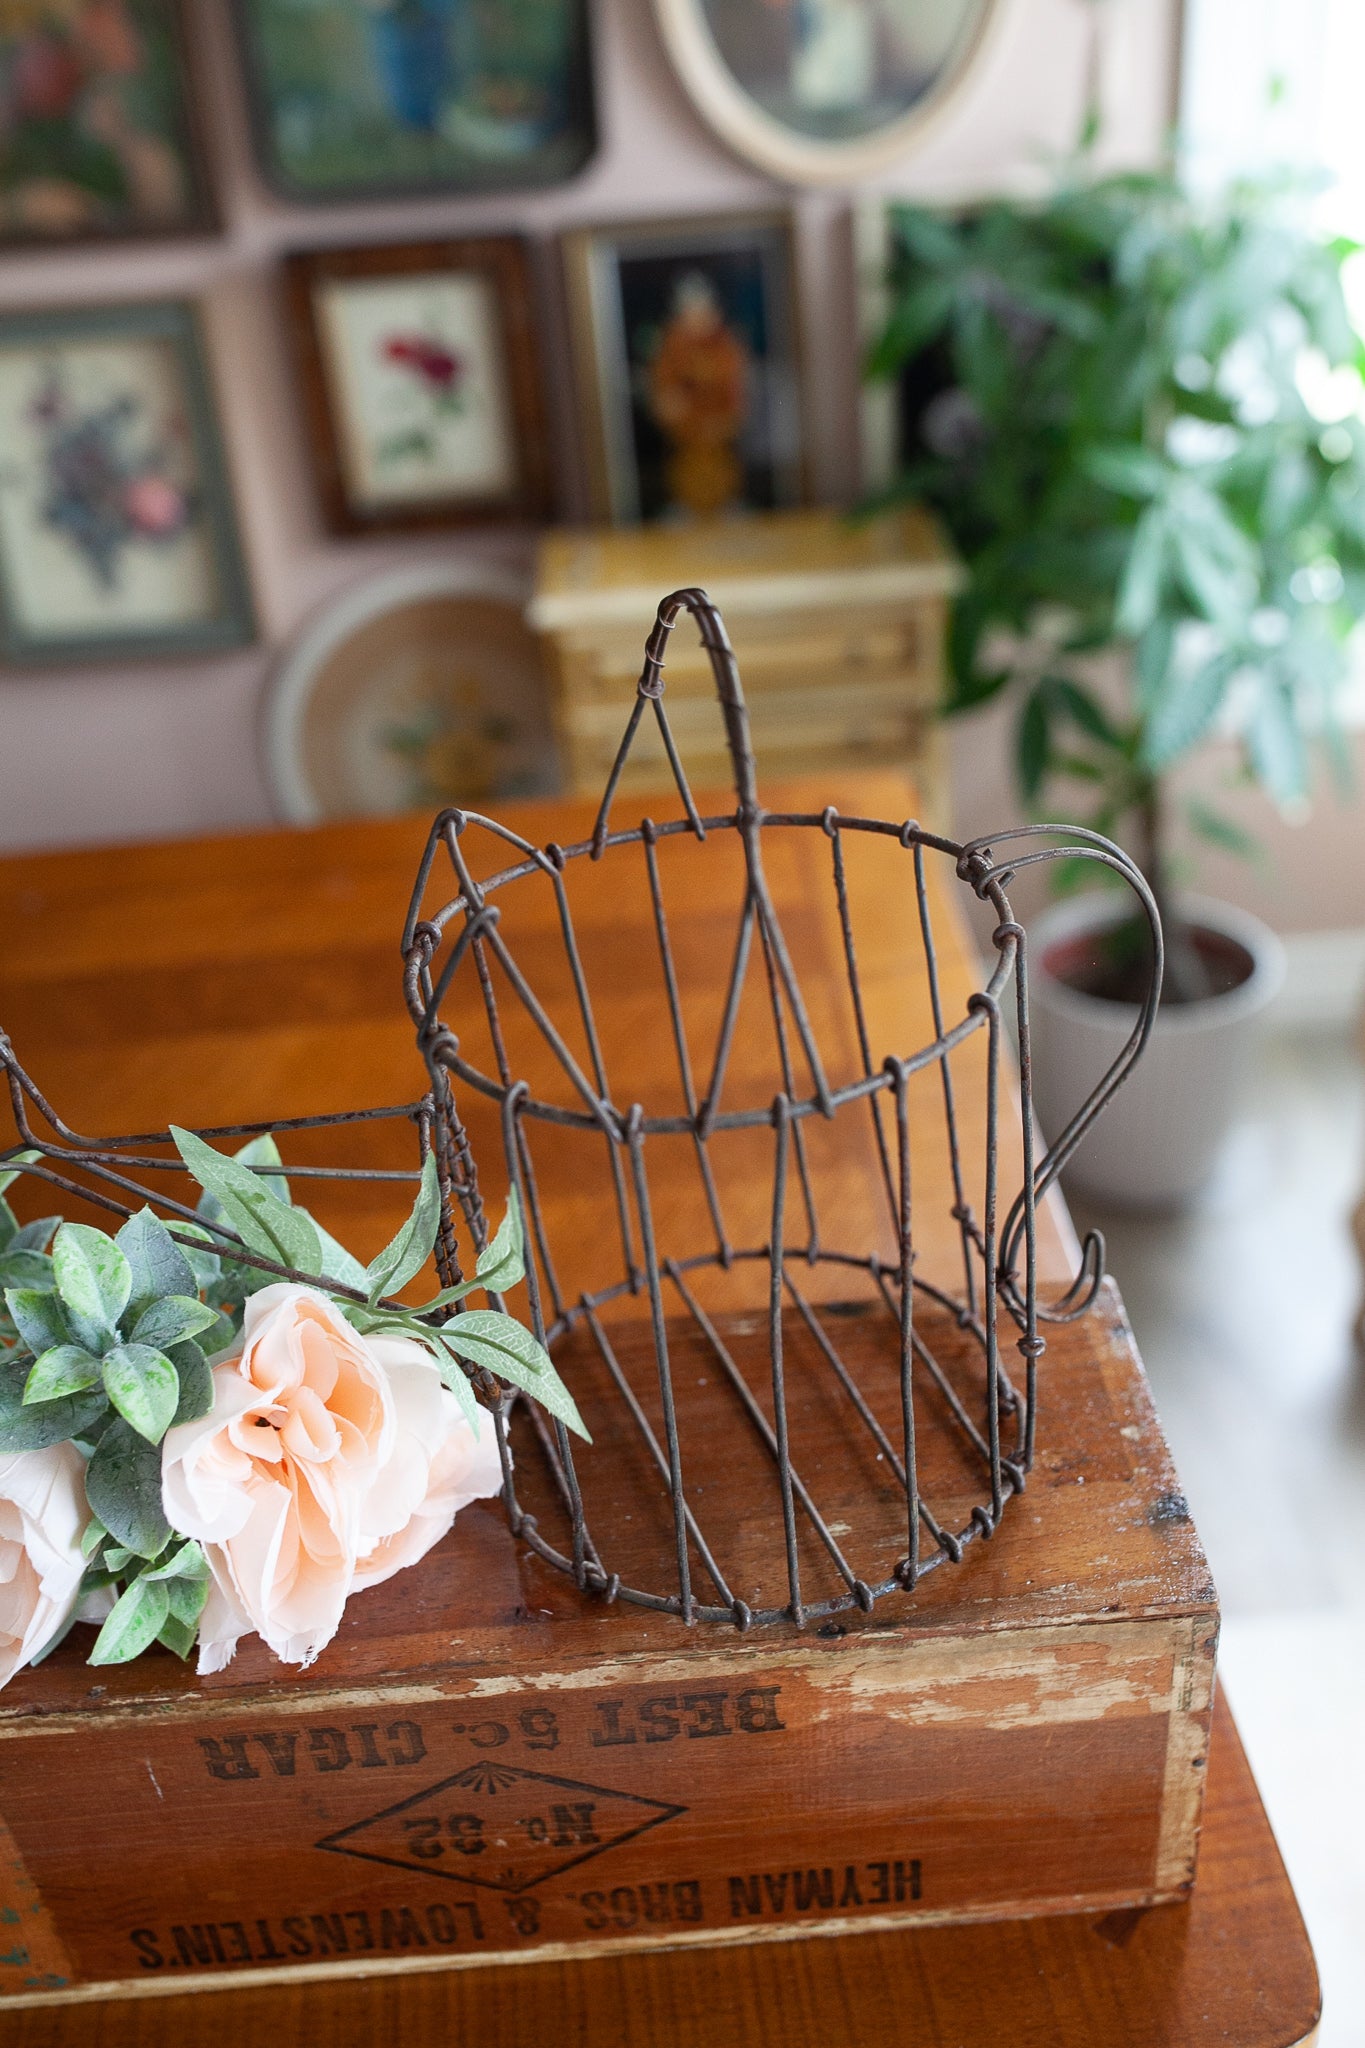 Vintage Watering Can - Wire Watering Can -Vintage Garden Decor